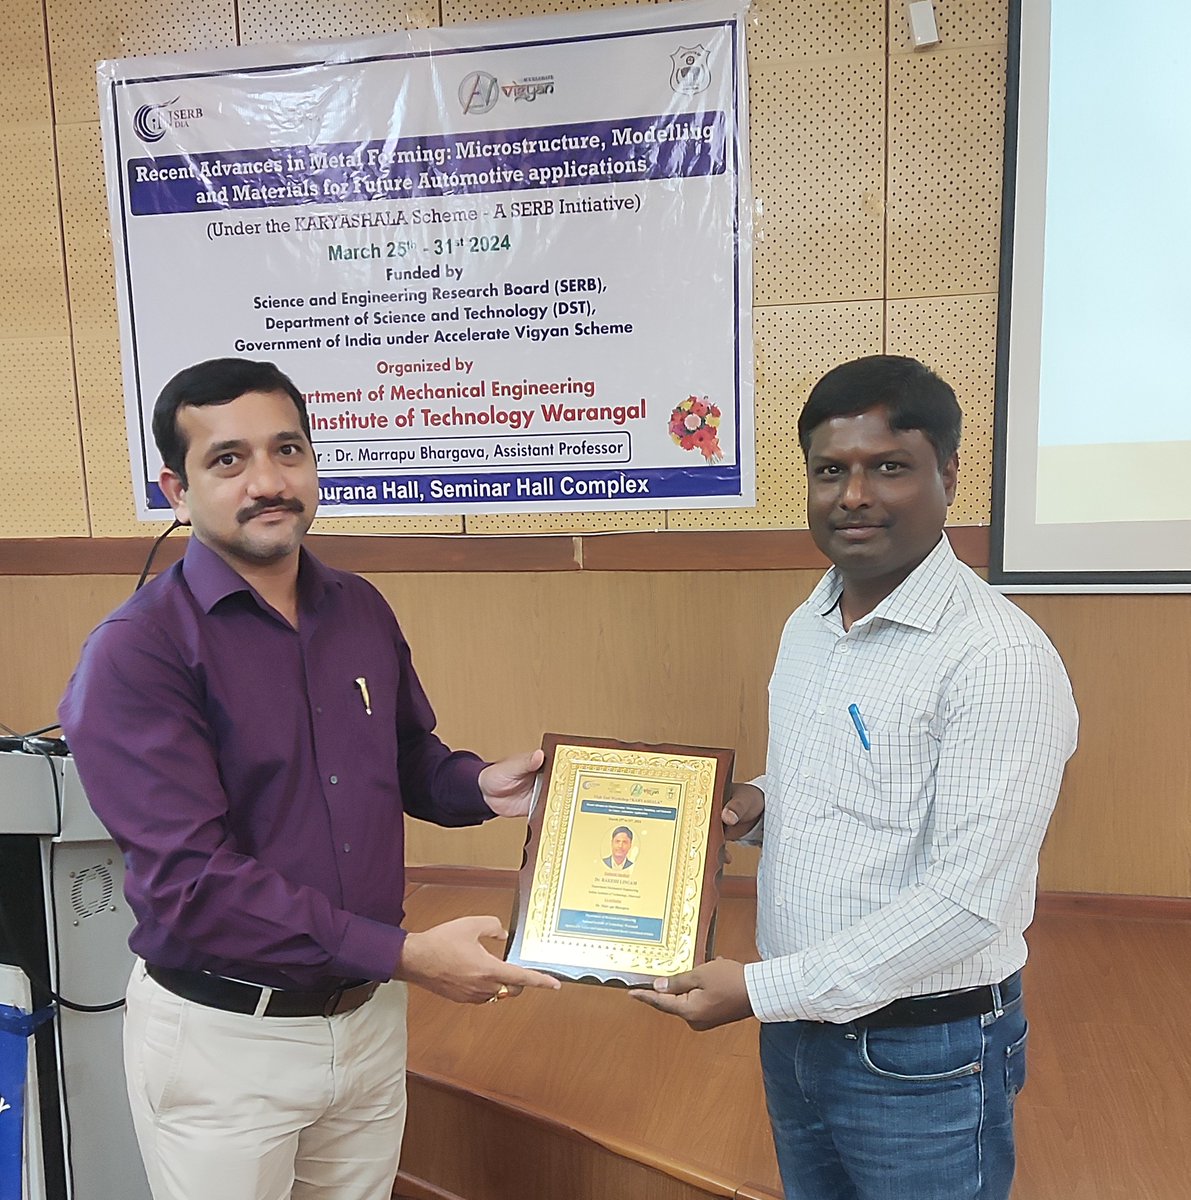 Dr. Rakesh Lingam, Assistant Professor of Mechanical, Materials, and Aerospace Engineering, IIT Dharwad recently delivered a guest lecture on Hybrid Metal Forming Processes at the Karyashala workshop organized by Dr. Bhargave Marrapu at NIT Warangal. The event was part of the